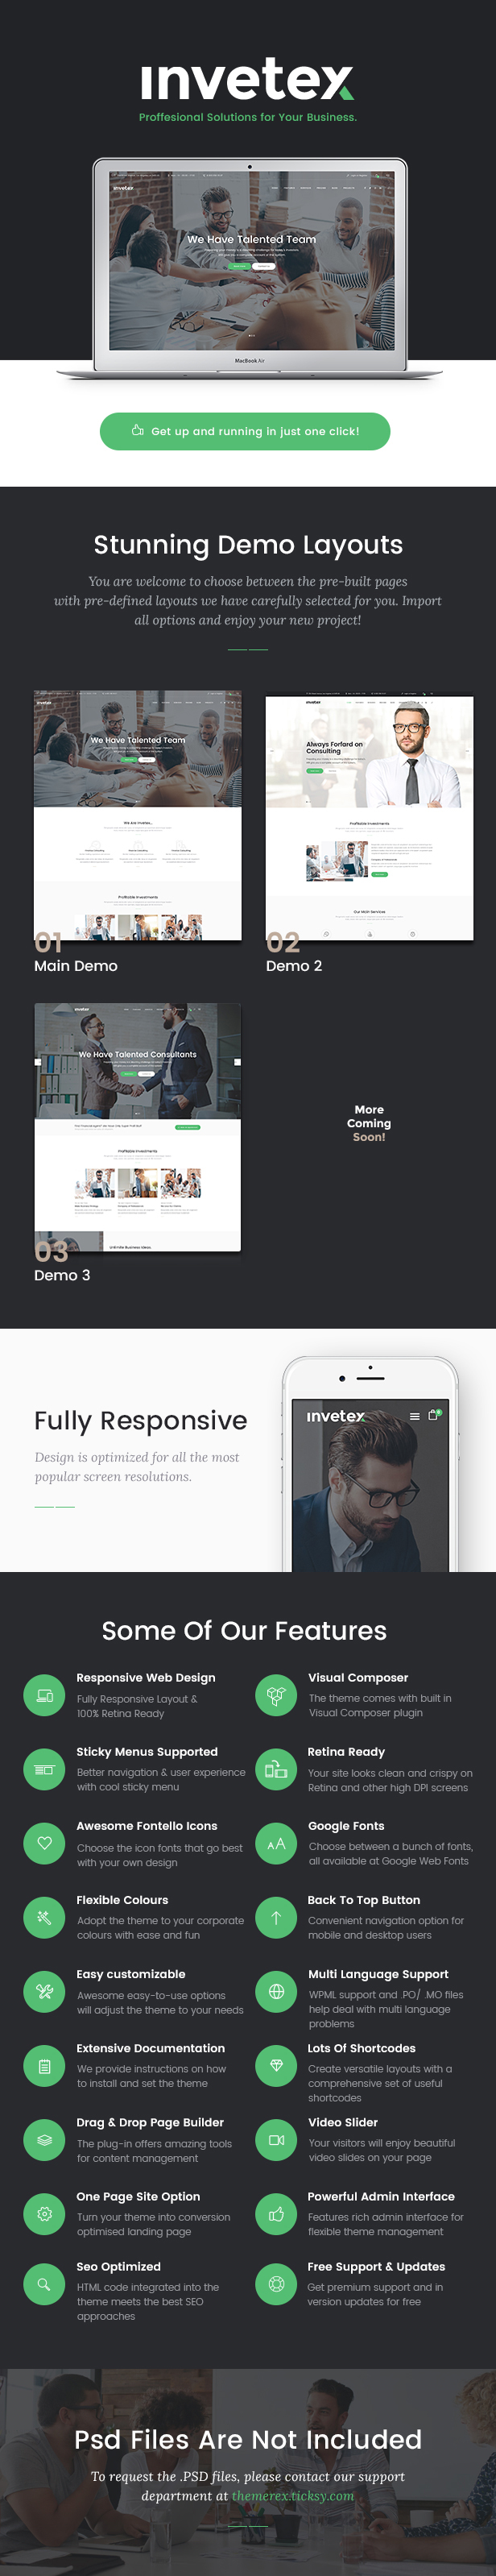 invetex 1 - Invetex | Business Consulting & Investments WordPress Theme + RTL